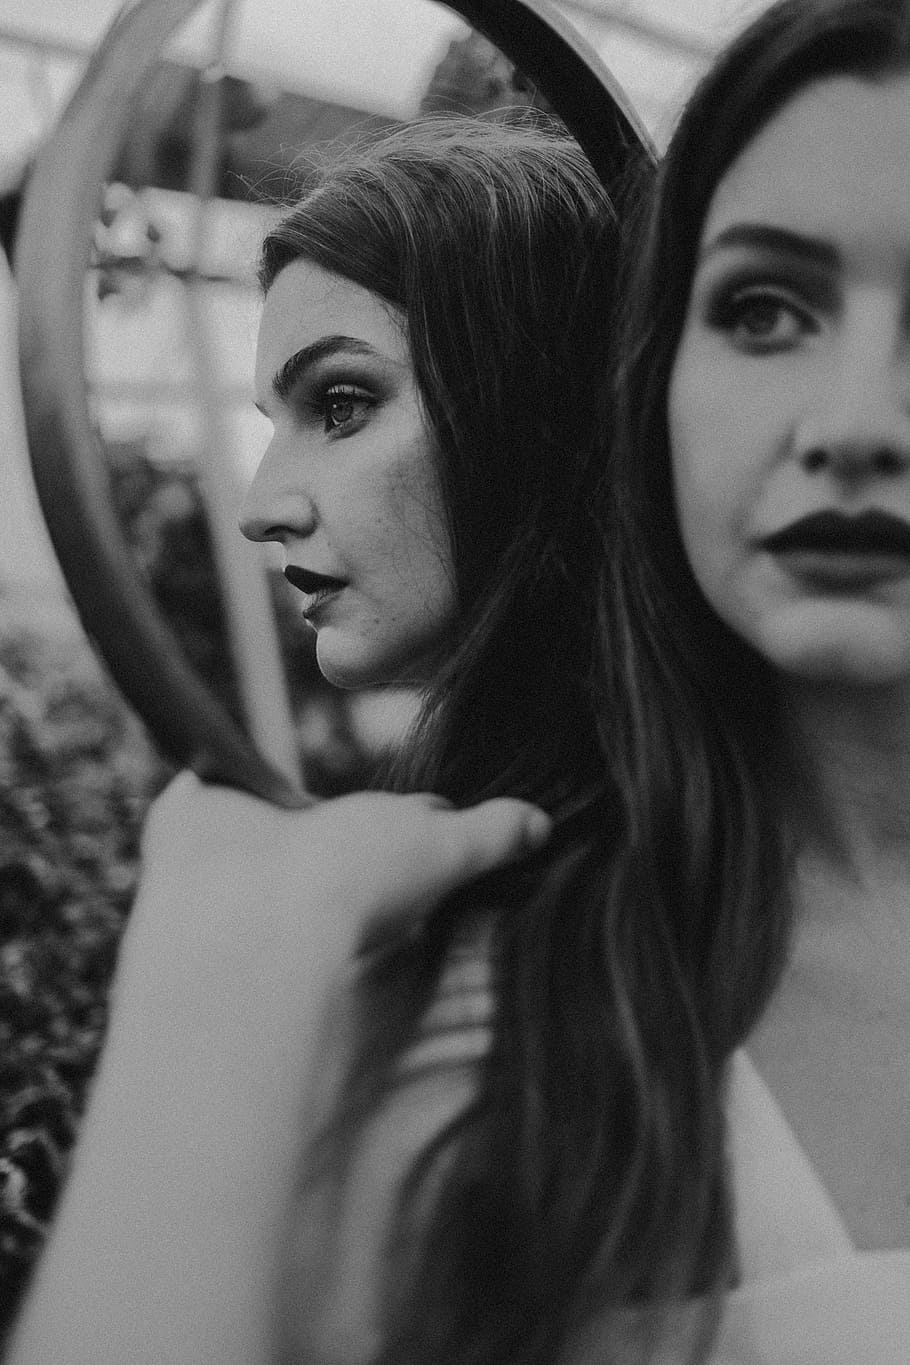 Hd Wallpaper Grayscale Photography Of Woman Reflected On Mirror Reflection Wallpaper Flare